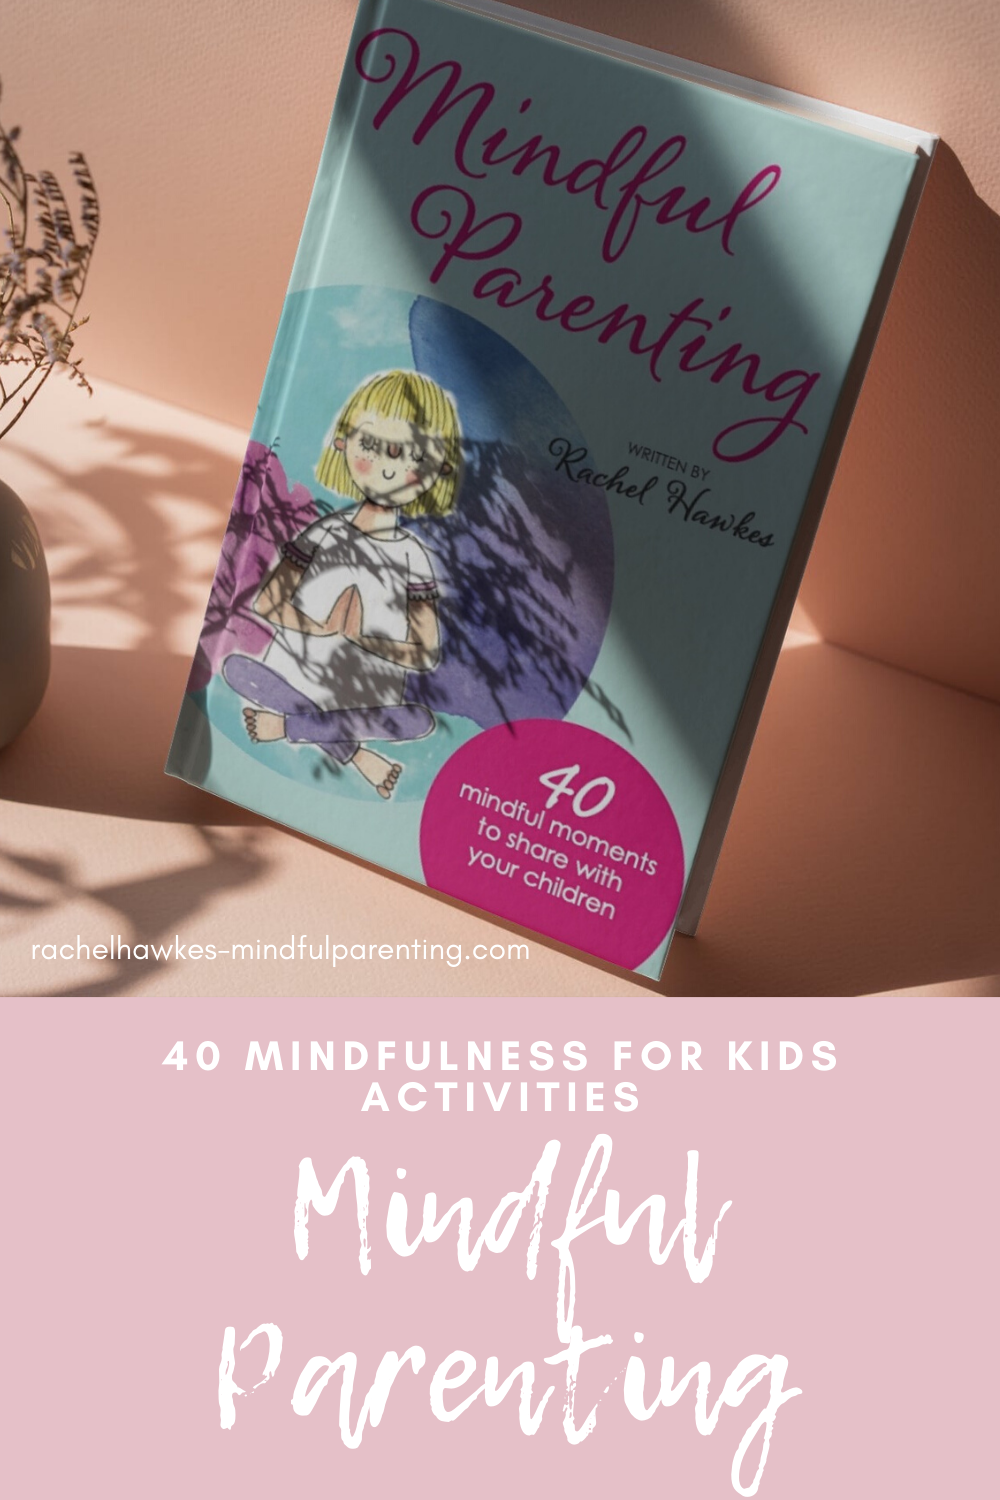 40 mindfulness for kids activities pin.png